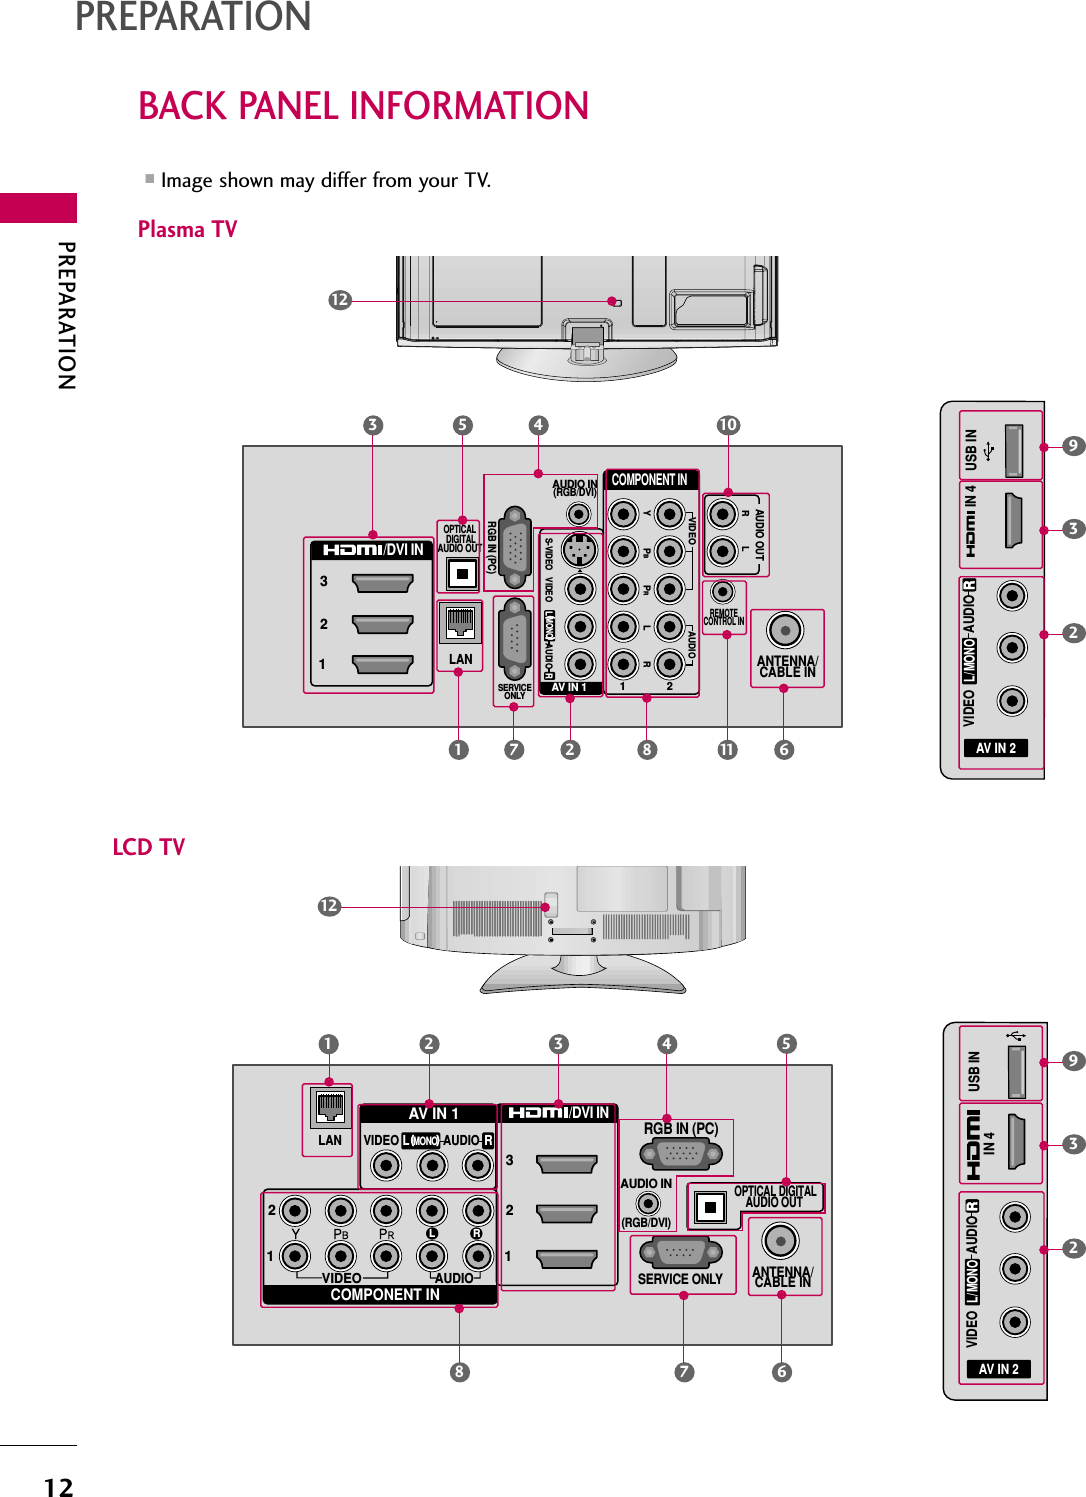 PREPARATION12BACK PANEL INFORMATIONPREPARATION■Image shown may differ from your TV.(            )(            )(            )R12VIDEOAUDIOL RSERVICE ONLYAUDIO IN(RGB/DVI)OPTICAL DIGITALAUDIO OUT ANTENNA/CABLE INRGB IN (PC)AV IN 1COMPONENT IN23121MONO(                        )AUDIOVIDEOLAN/DVI IN(            )LR(            )R2 37 68(            )(            )(            )AV IN 2L/MONORAUDIOVIDEOUSB ININ 42935R(            )(            ) (            )121R213/DVI INCOMPONENT INANTENNA/CABLE INOPTICAL DIGITALAUDIO OUT RGB IN (PC)LANSERVICEONLYAUDIO IN(RGB/DVI)AUDIO OUTREMOTECONTROL INVIDEOAUDIO12LYPBPRRRLAUDIOVIDEOS-VIDEOMONO(                        )L RAV IN 1(            ) (            )361181 7 2AV IN 2L/MONORAUDIOVIDEOUSB ININ 4(            )(            ) (            )293Plasma TV LCD TV5 4410